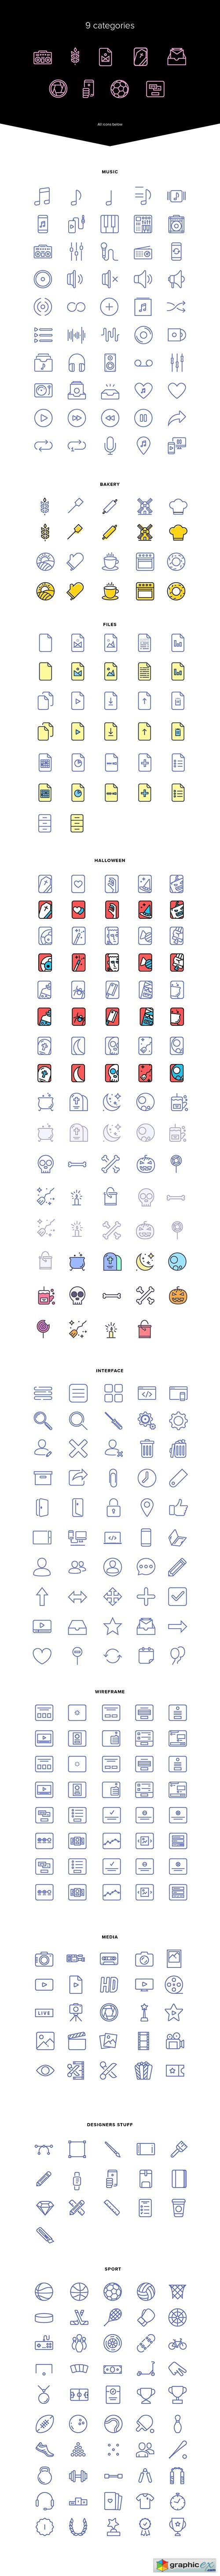 400+ Vector Icons pack, UI, Media